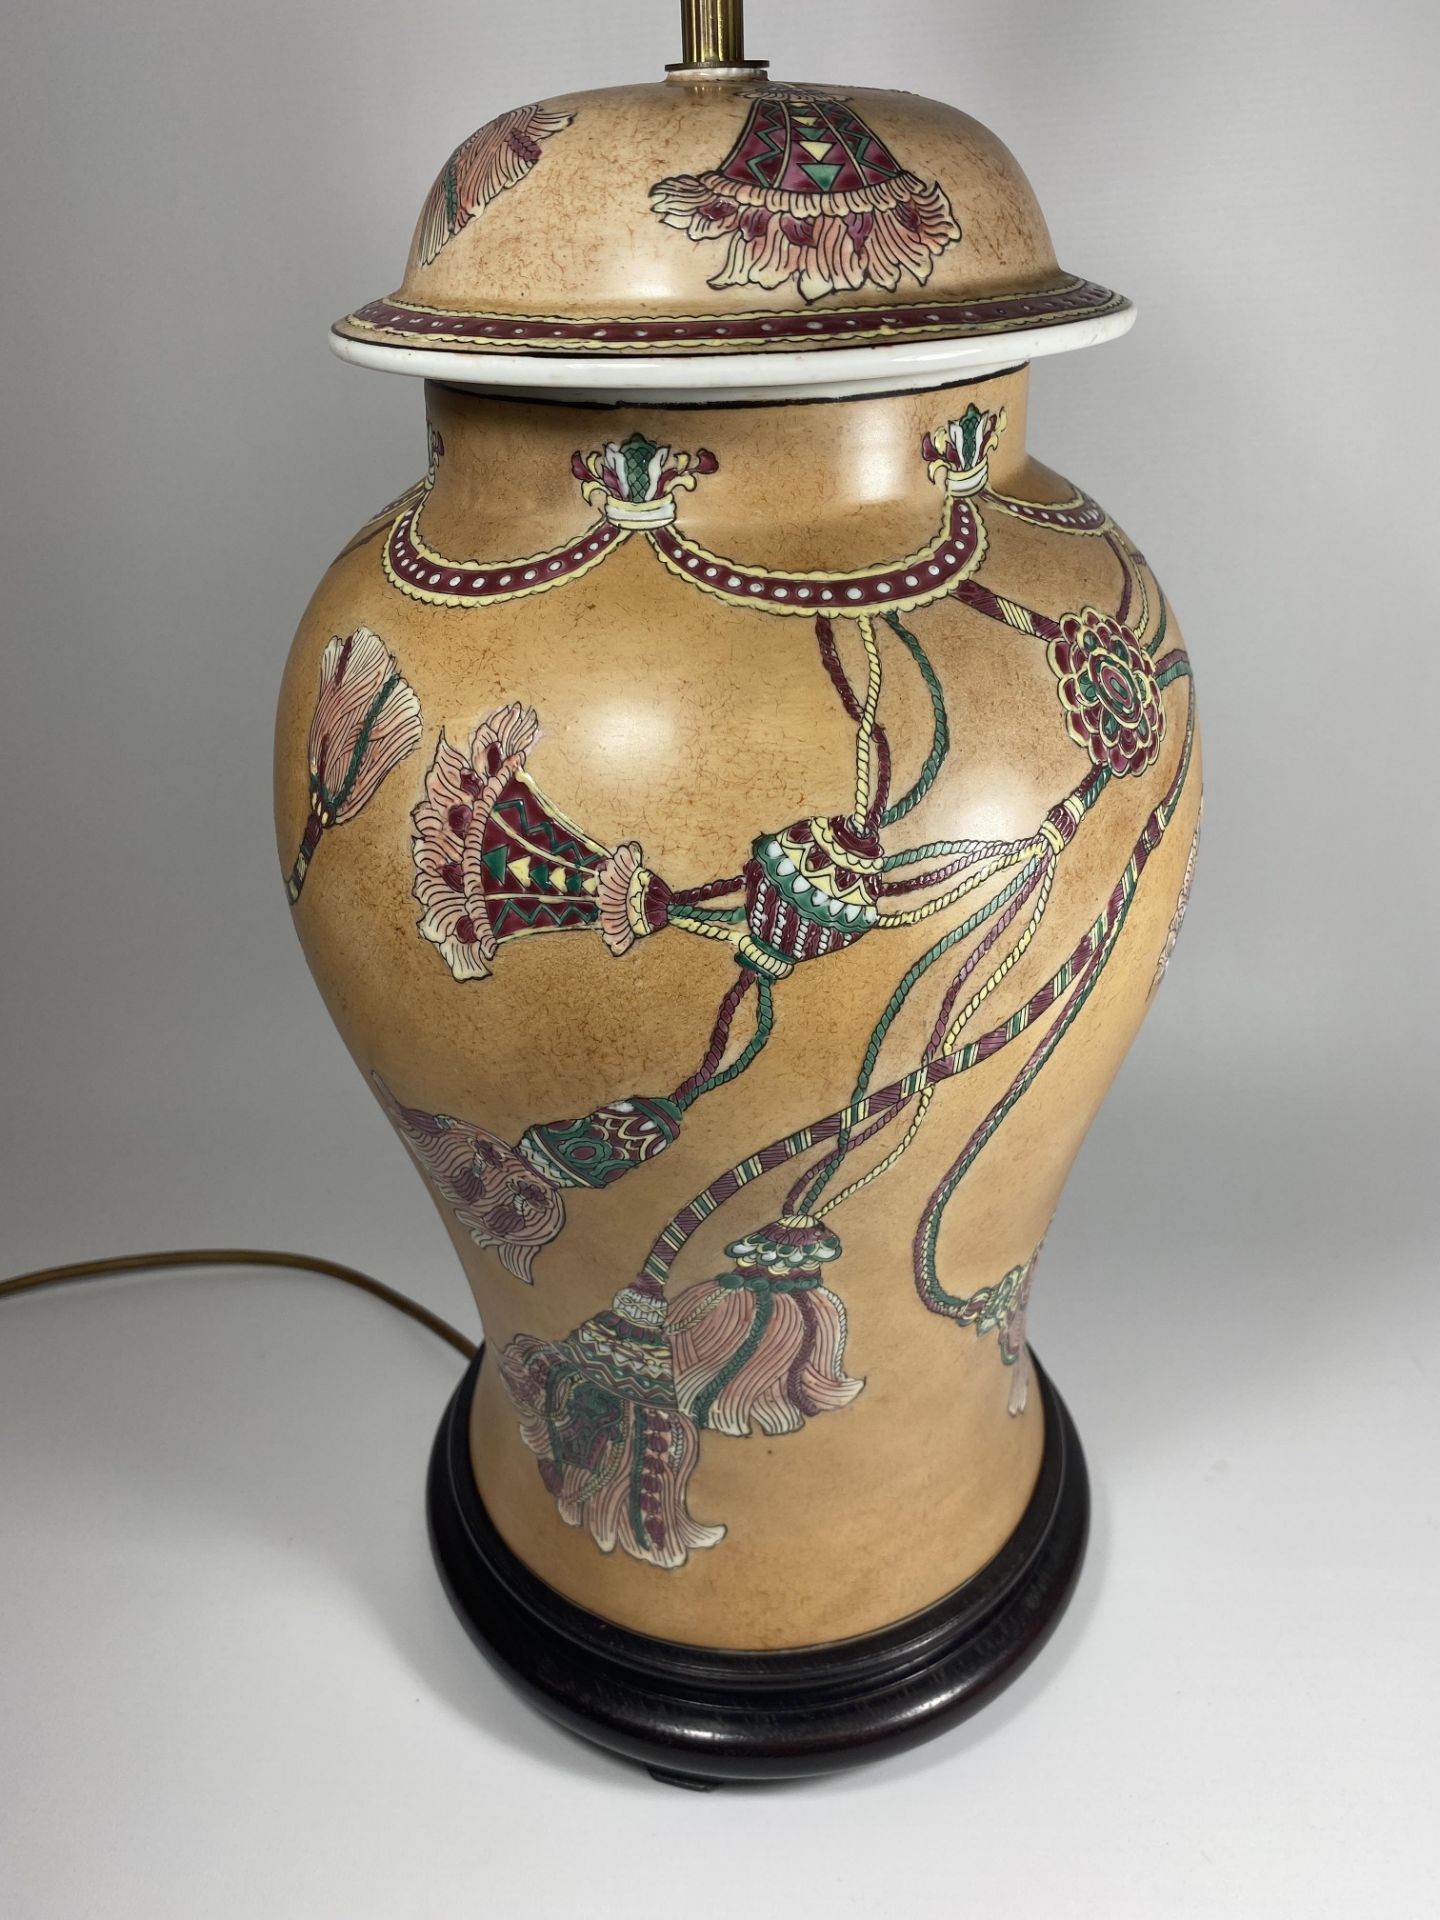 A LARGE ORIENTAL POTTERY TABLE LAMP WITH FLORAL DESIGN ON WOODEN BASE, HEIGHT APPROX 54CM - Image 2 of 5